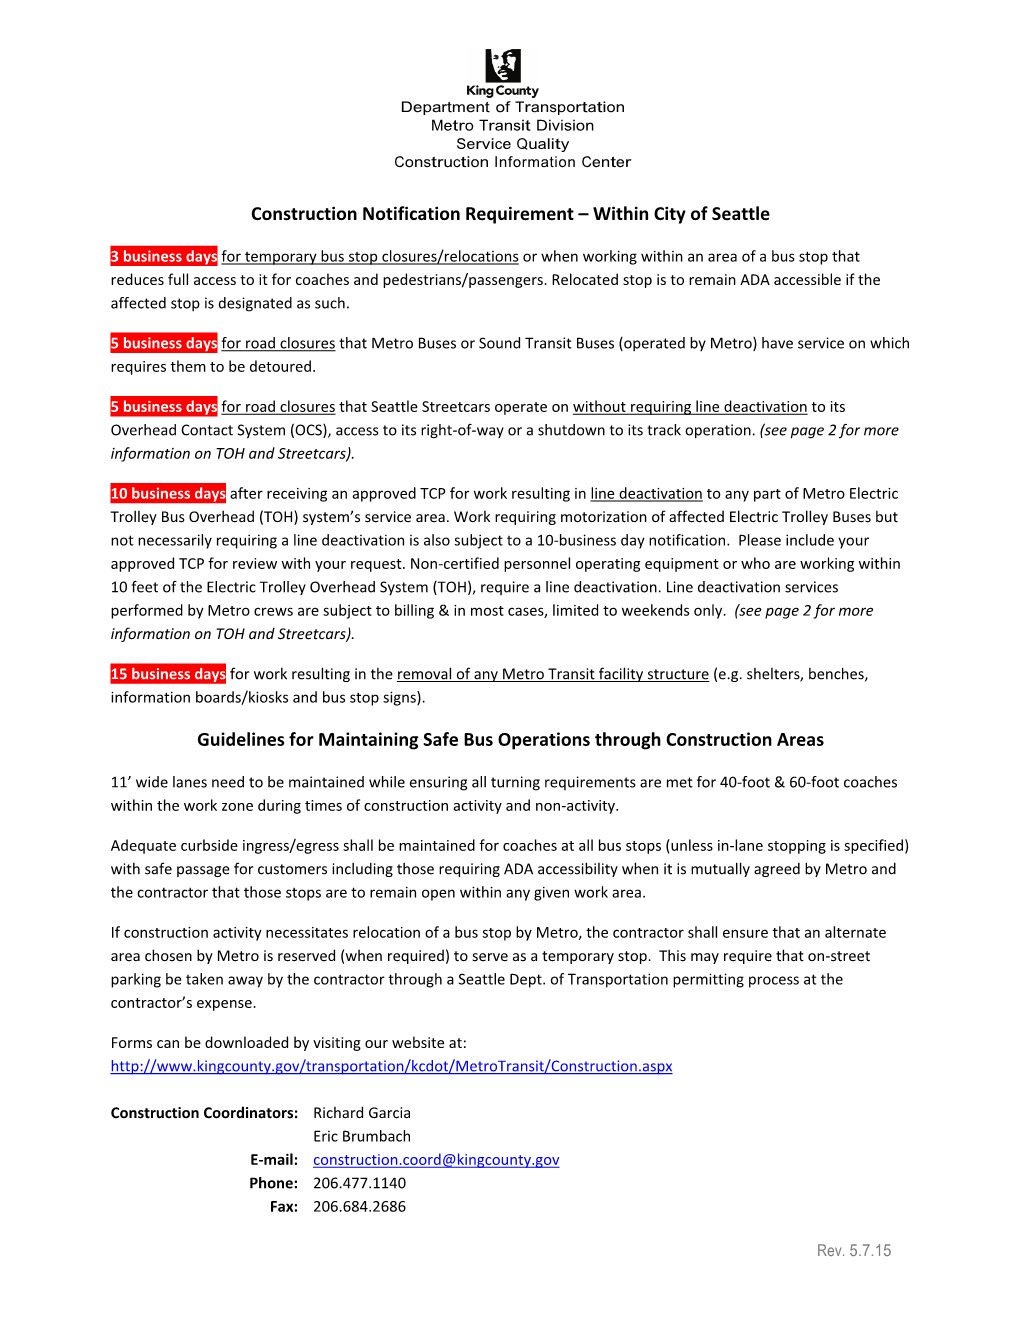 Construction Notification Requirement – Within City of Seattle